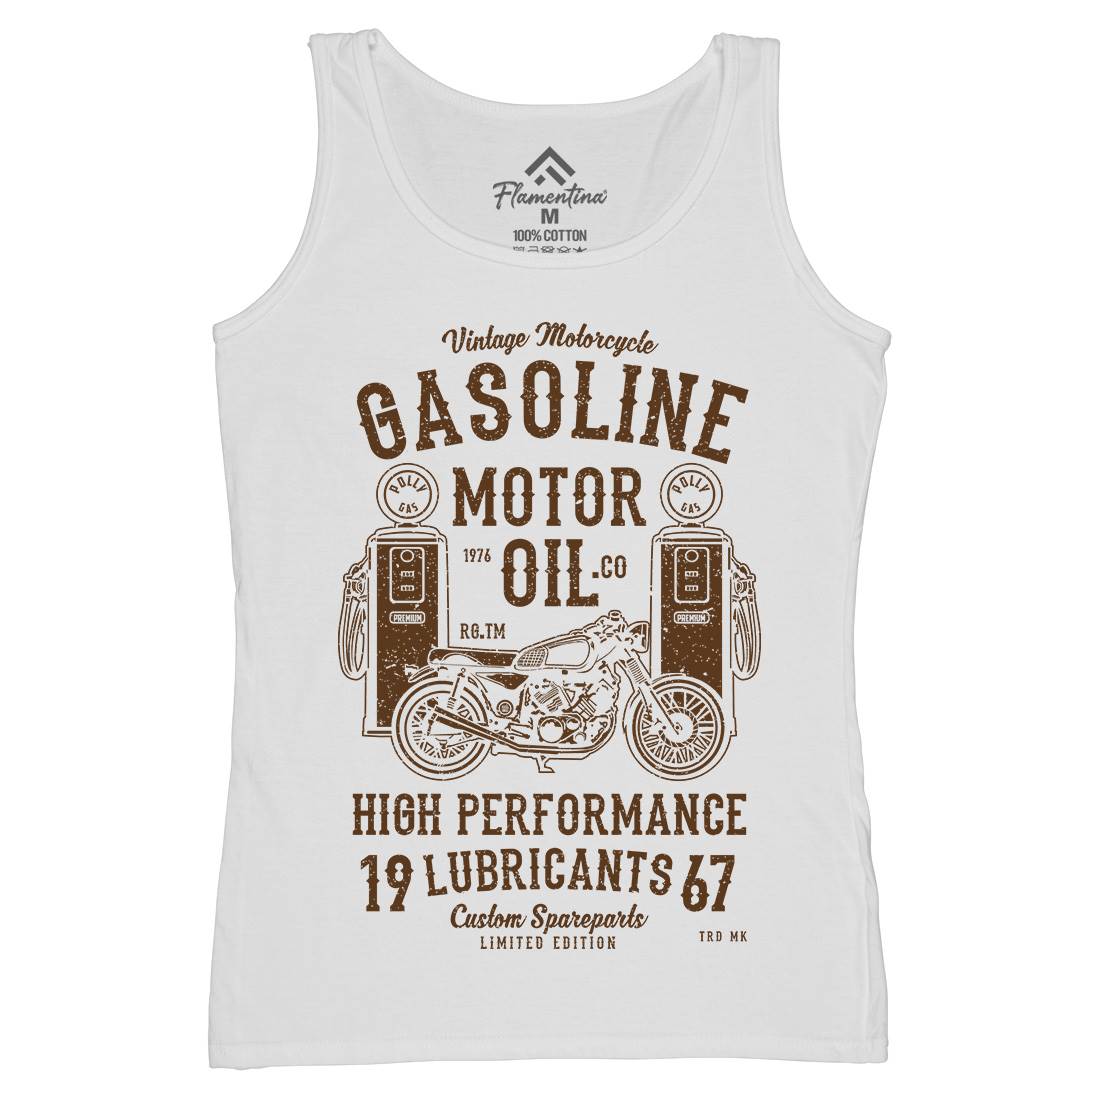 Gasoline Motor Oil Womens Organic Tank Top Vest Motorcycles A669